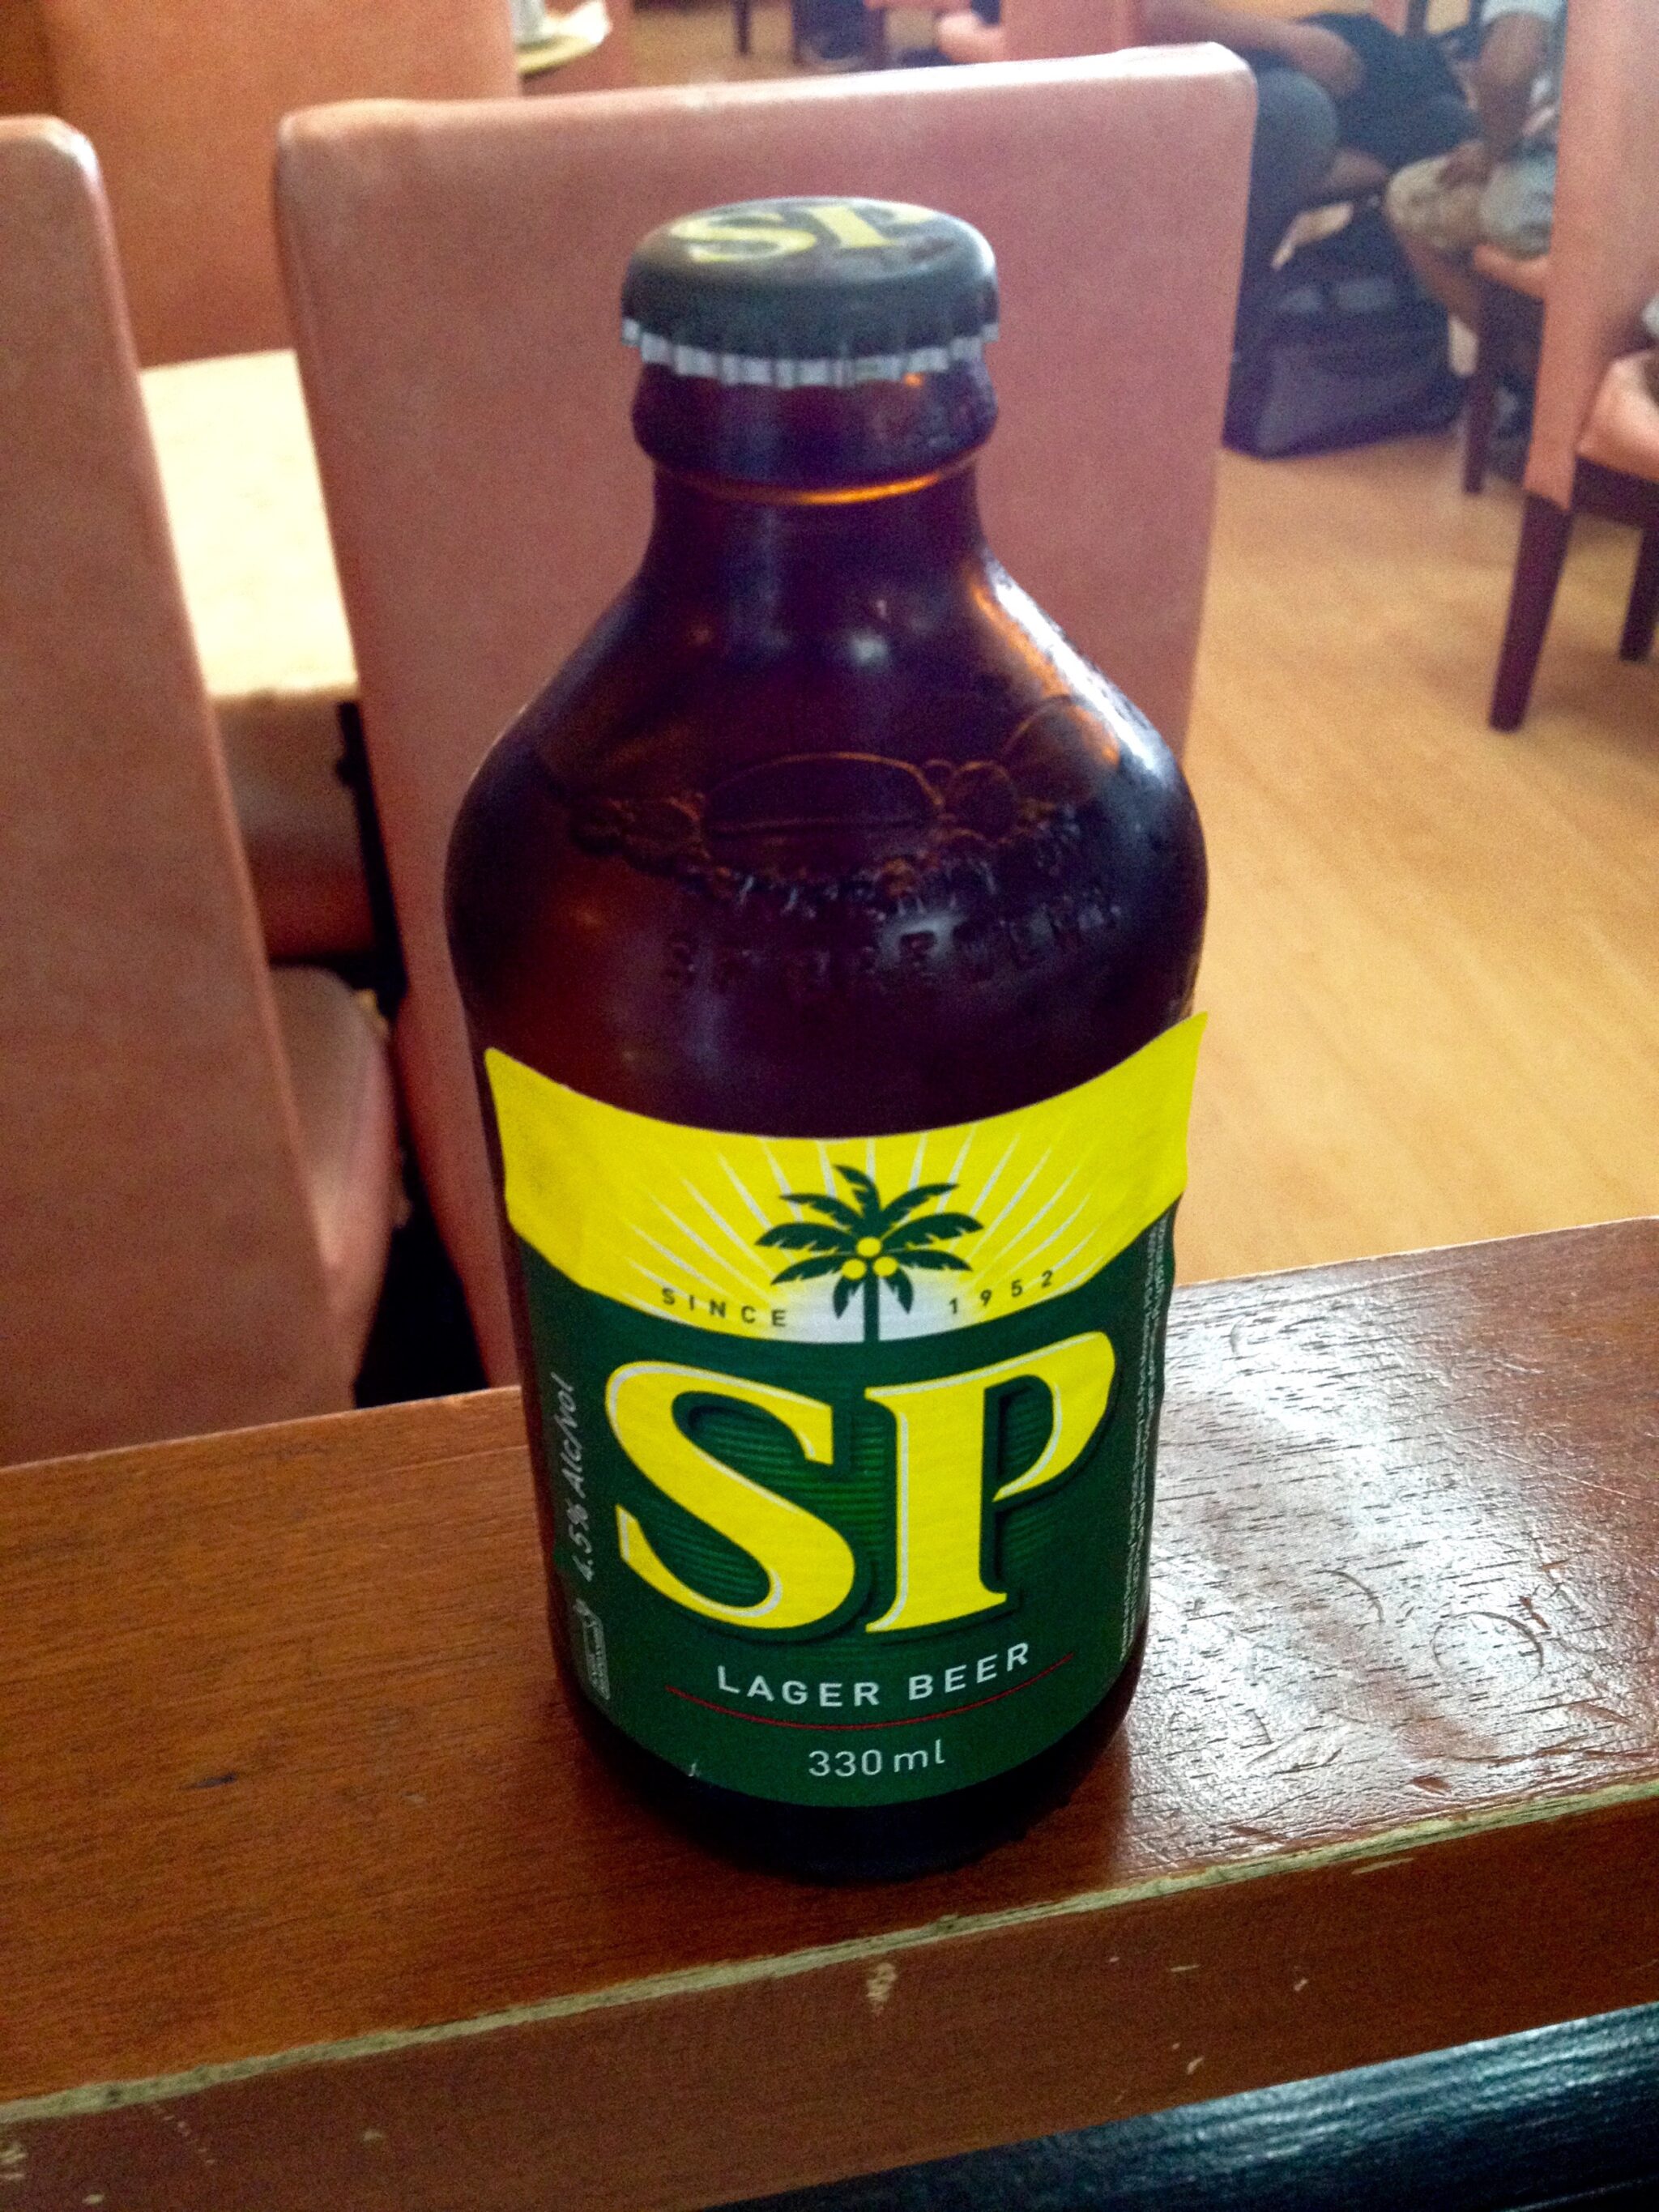 Gotta have an SP (South Pacific) beer